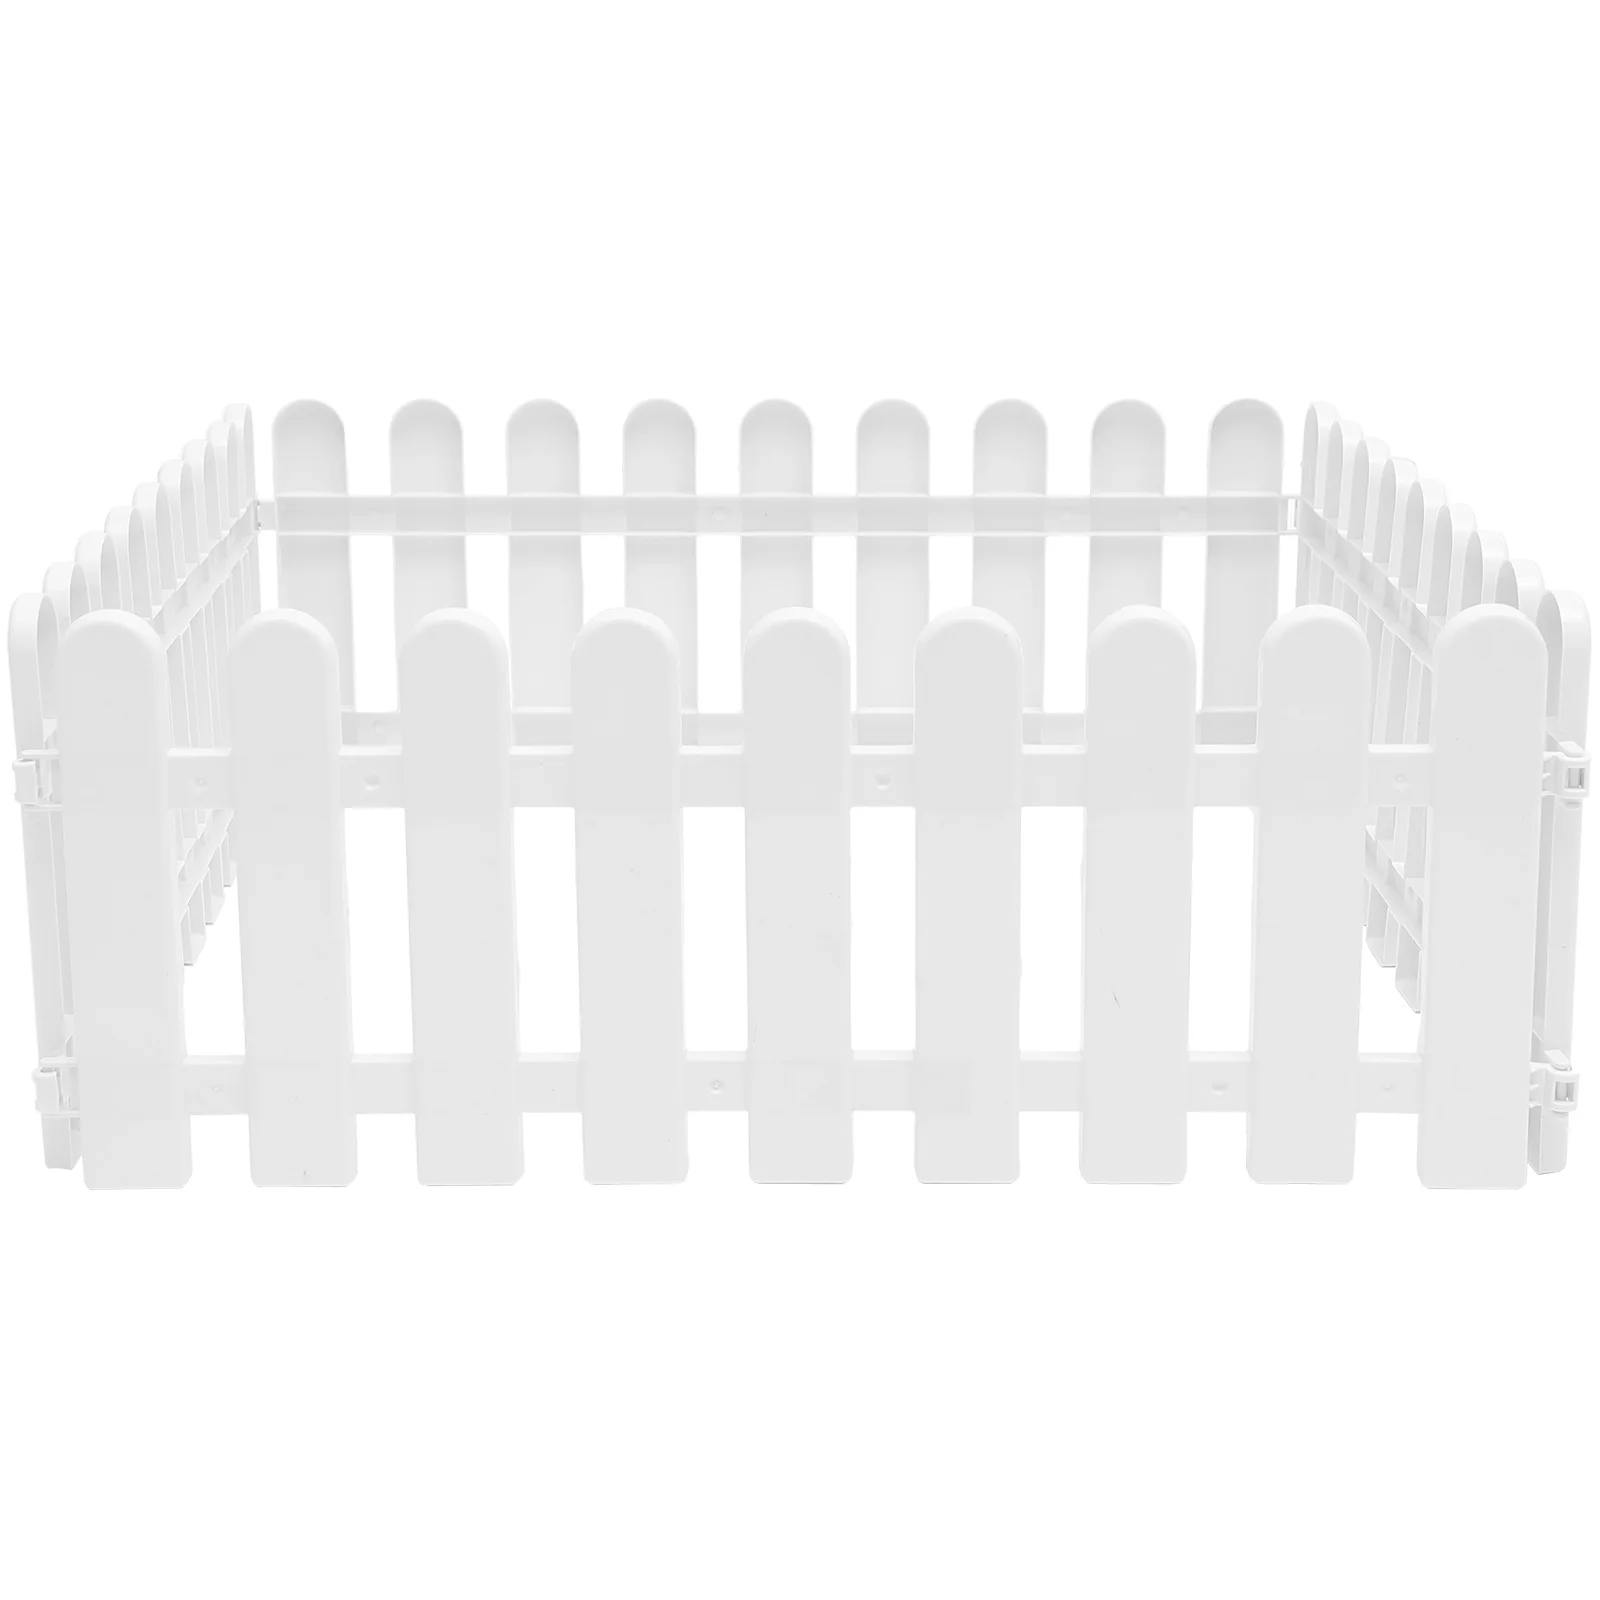 

4 Pcs The Fence Gardening Plastic Dog Fences for Yard Durable Outdoor Adornment